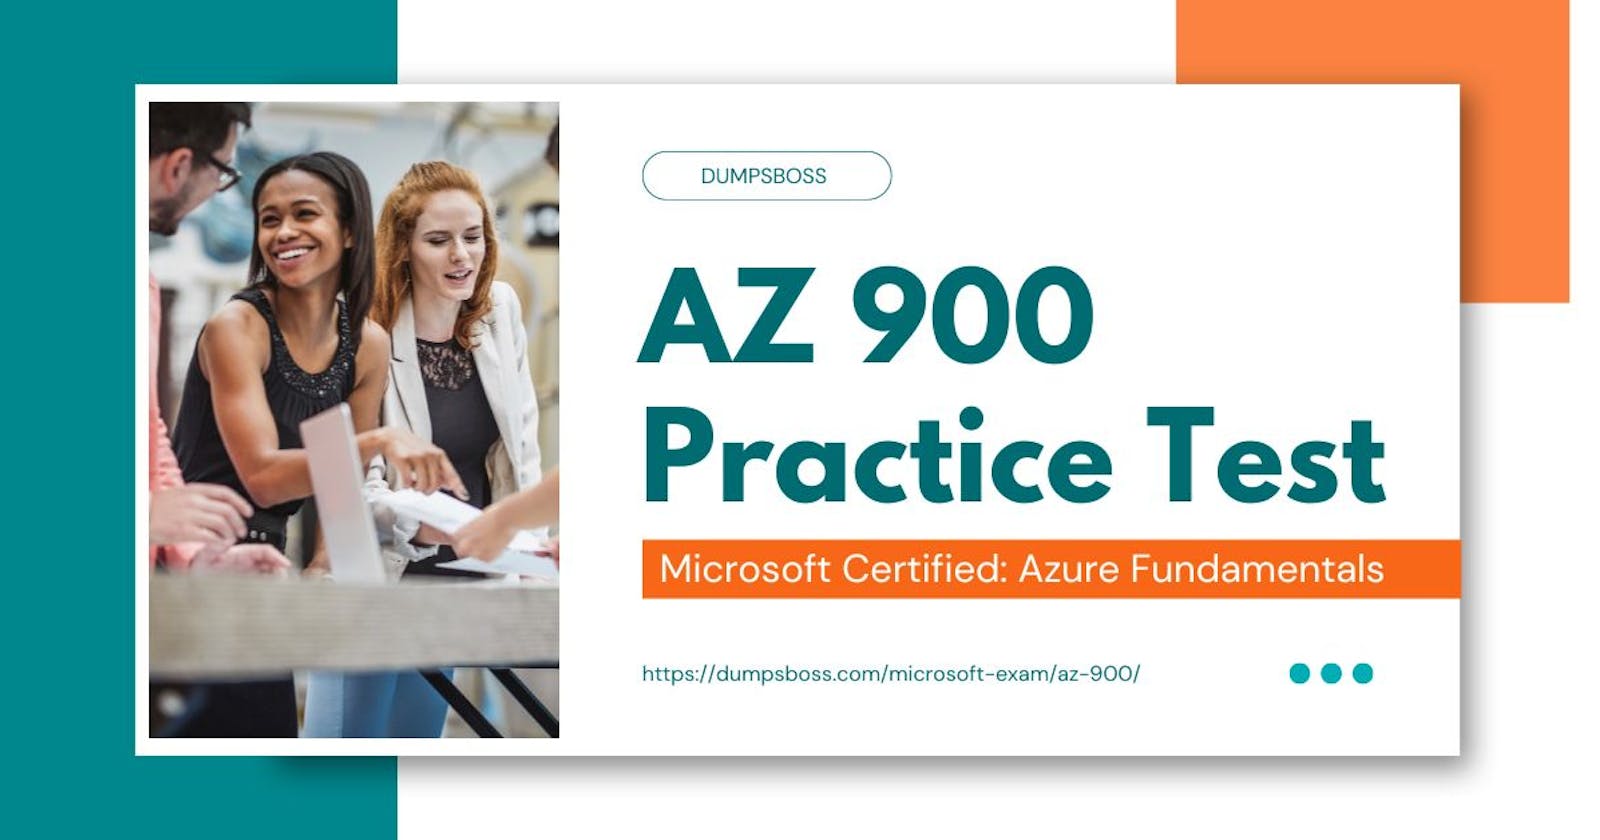 Expert Advice: How to Build Confidence and Reduce Anxiety Before Taking the AZ-900 Exam